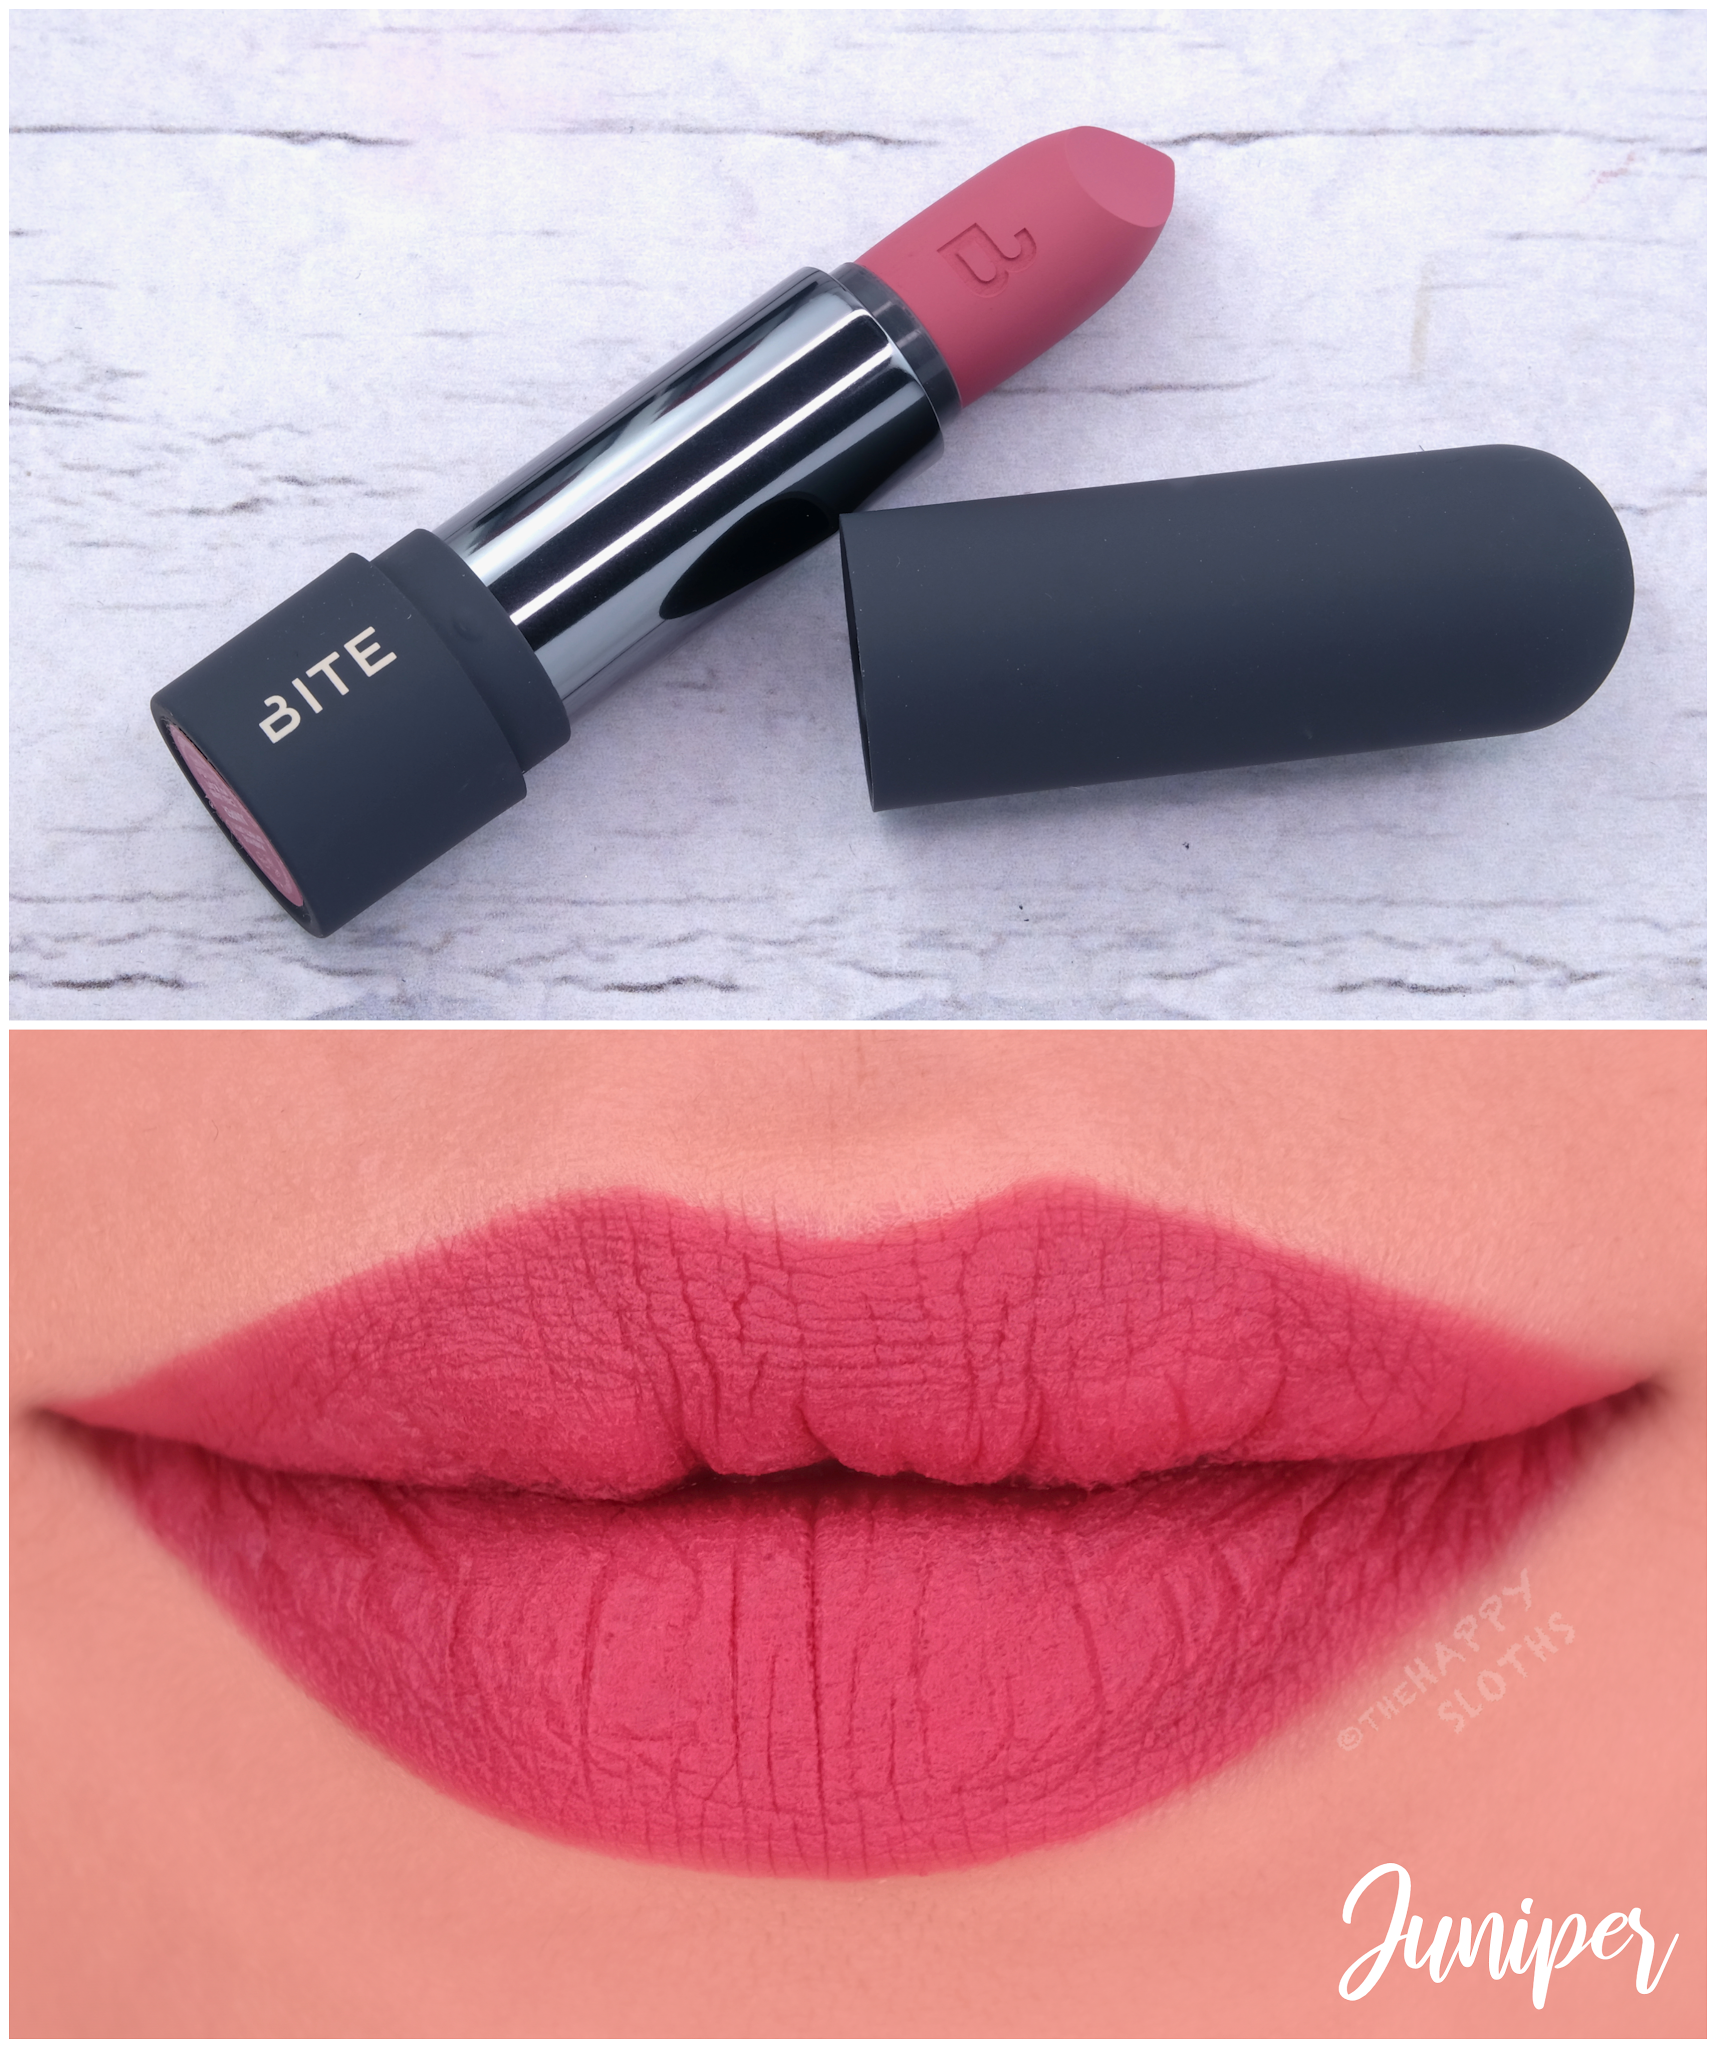 Bite Beauty | Power Move Soft Matte Lipstick in "Juniper": Review and Swatches